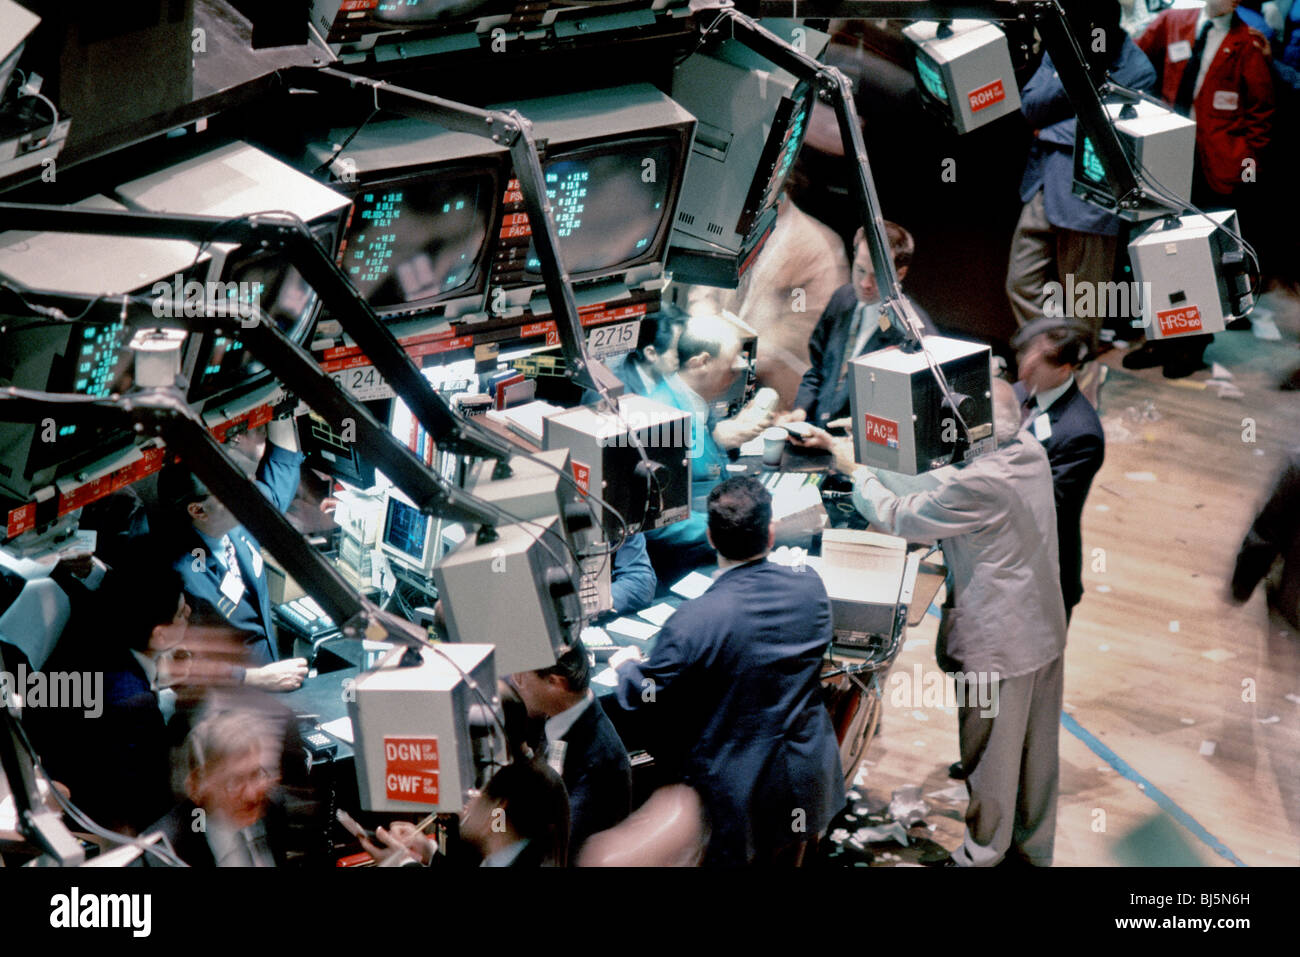 Aerial View, inside Medium Crowd of People, Businessmen Working, New York Stock Exchange, interior Overview Trading Floor, Stock Traders, 1980s business Stock Photo